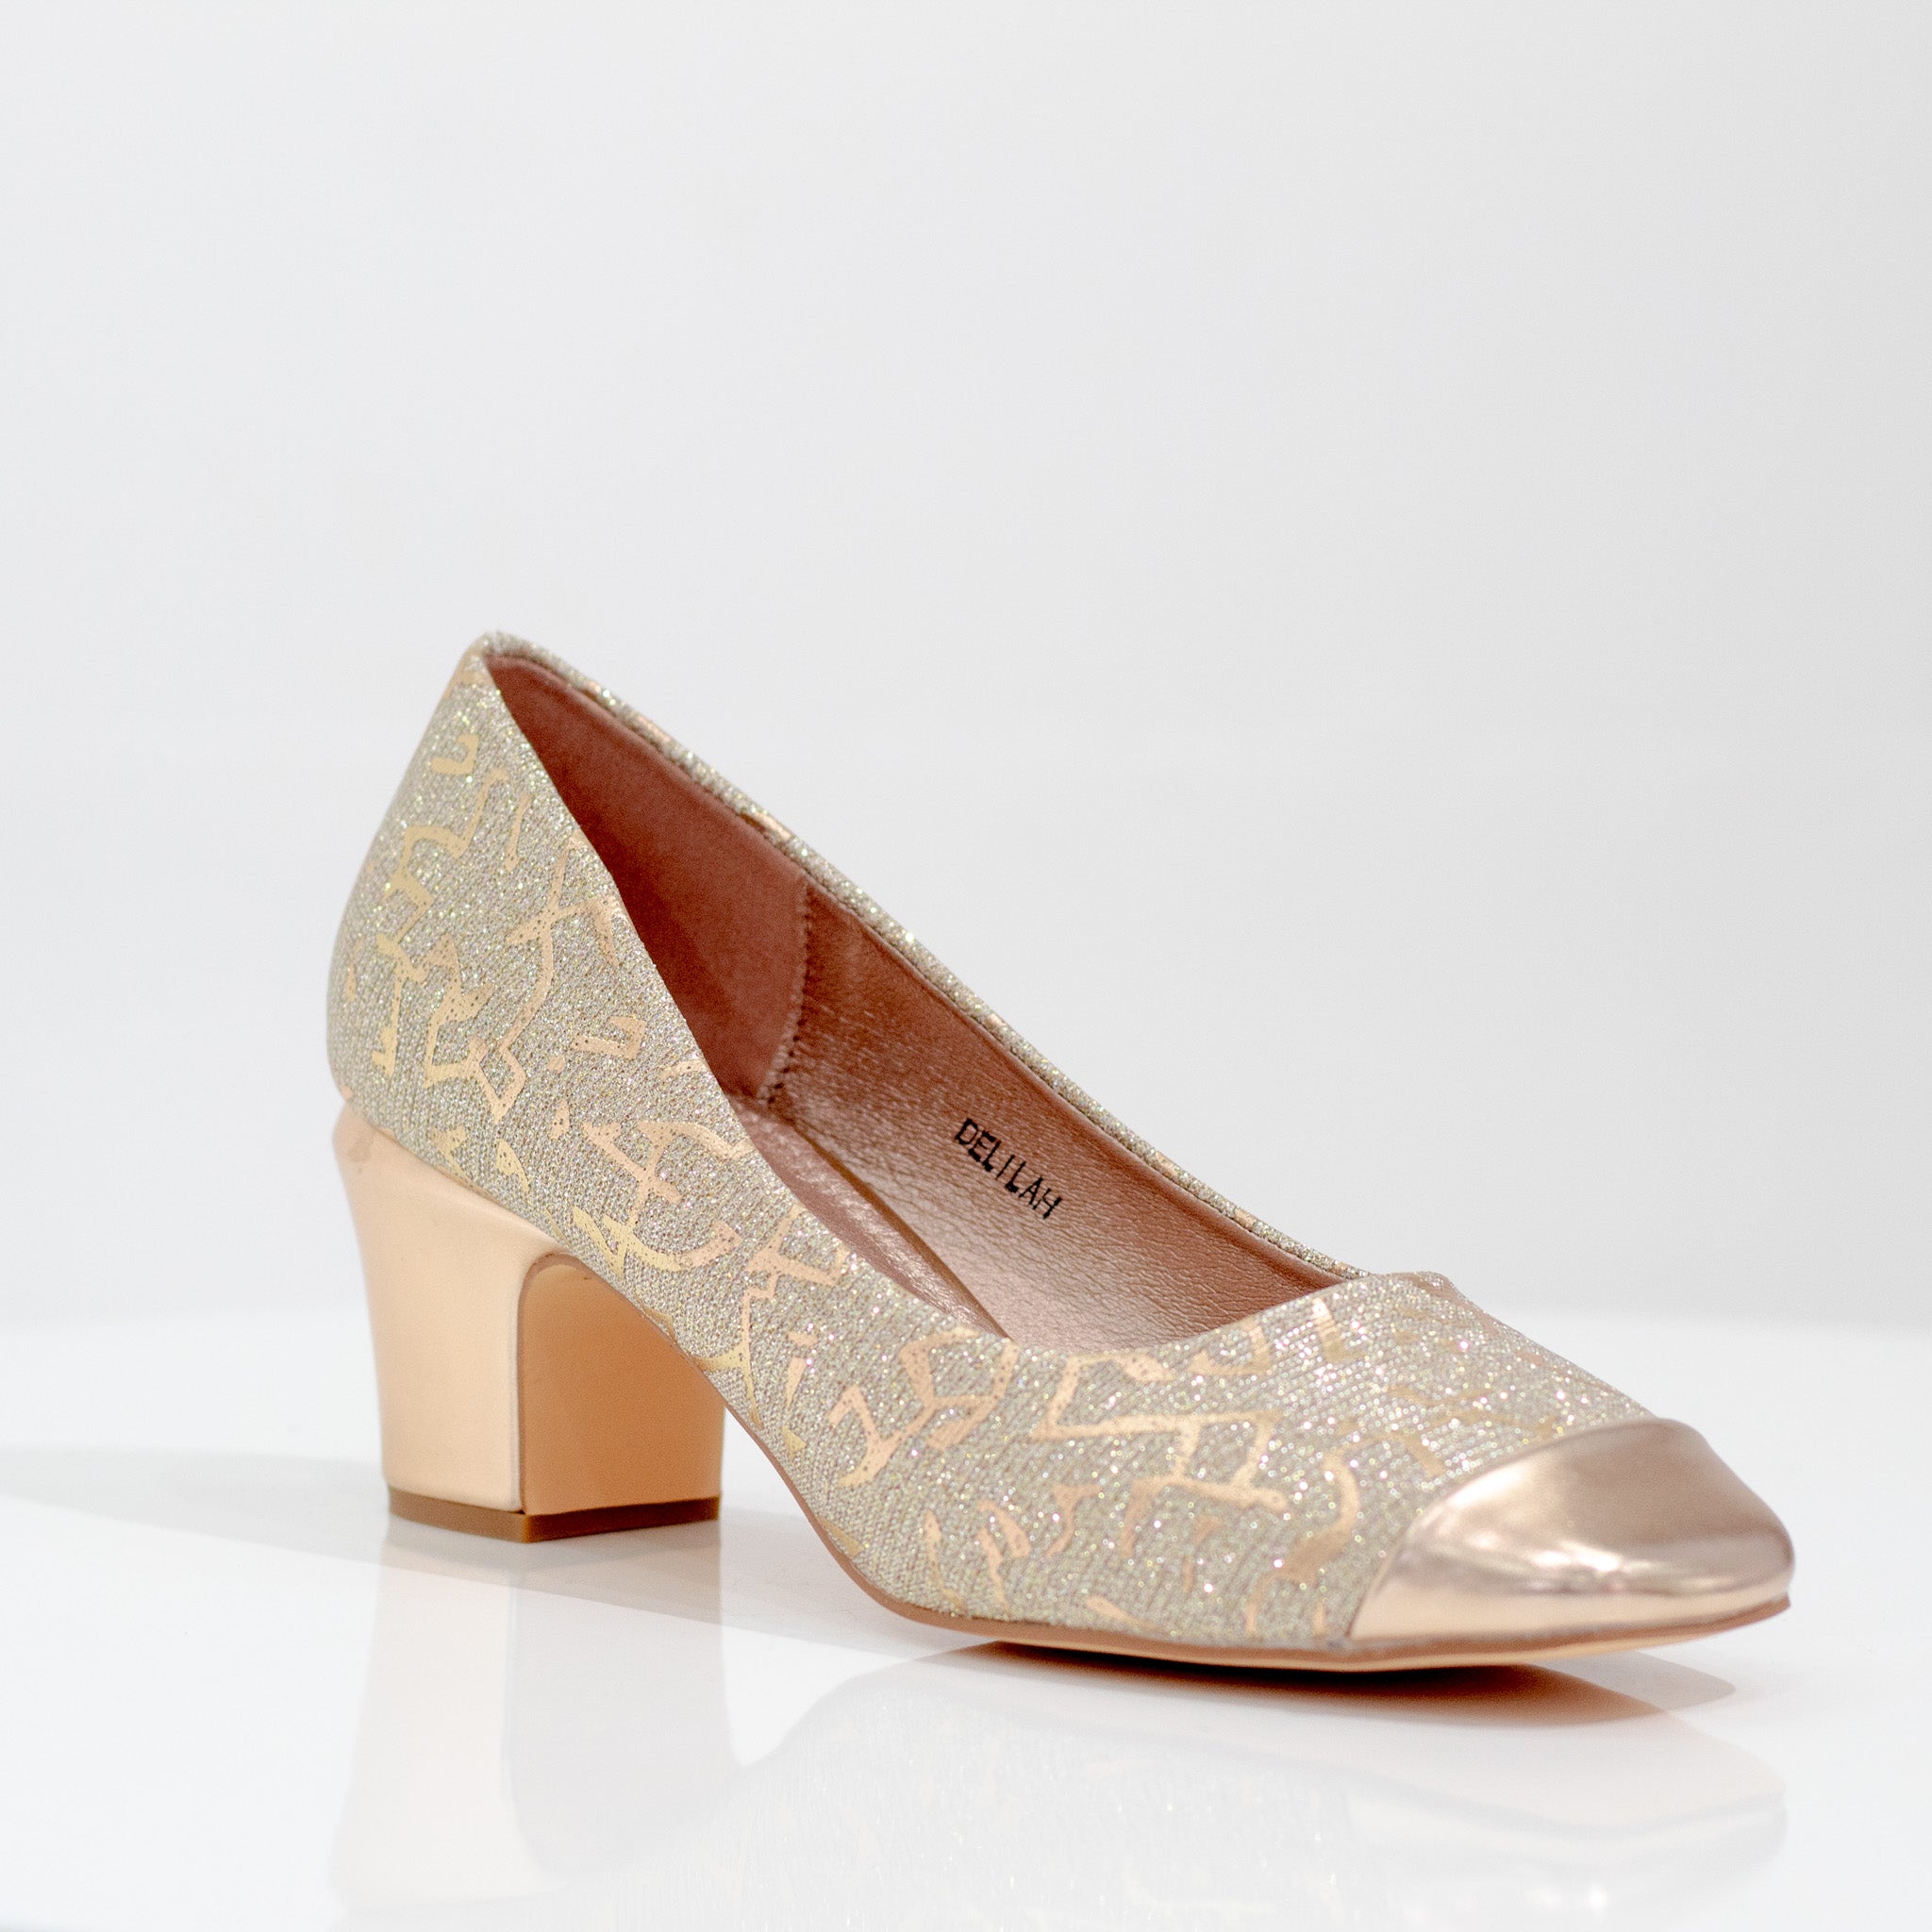 comfy 5cm heel pointy court shoe champagne